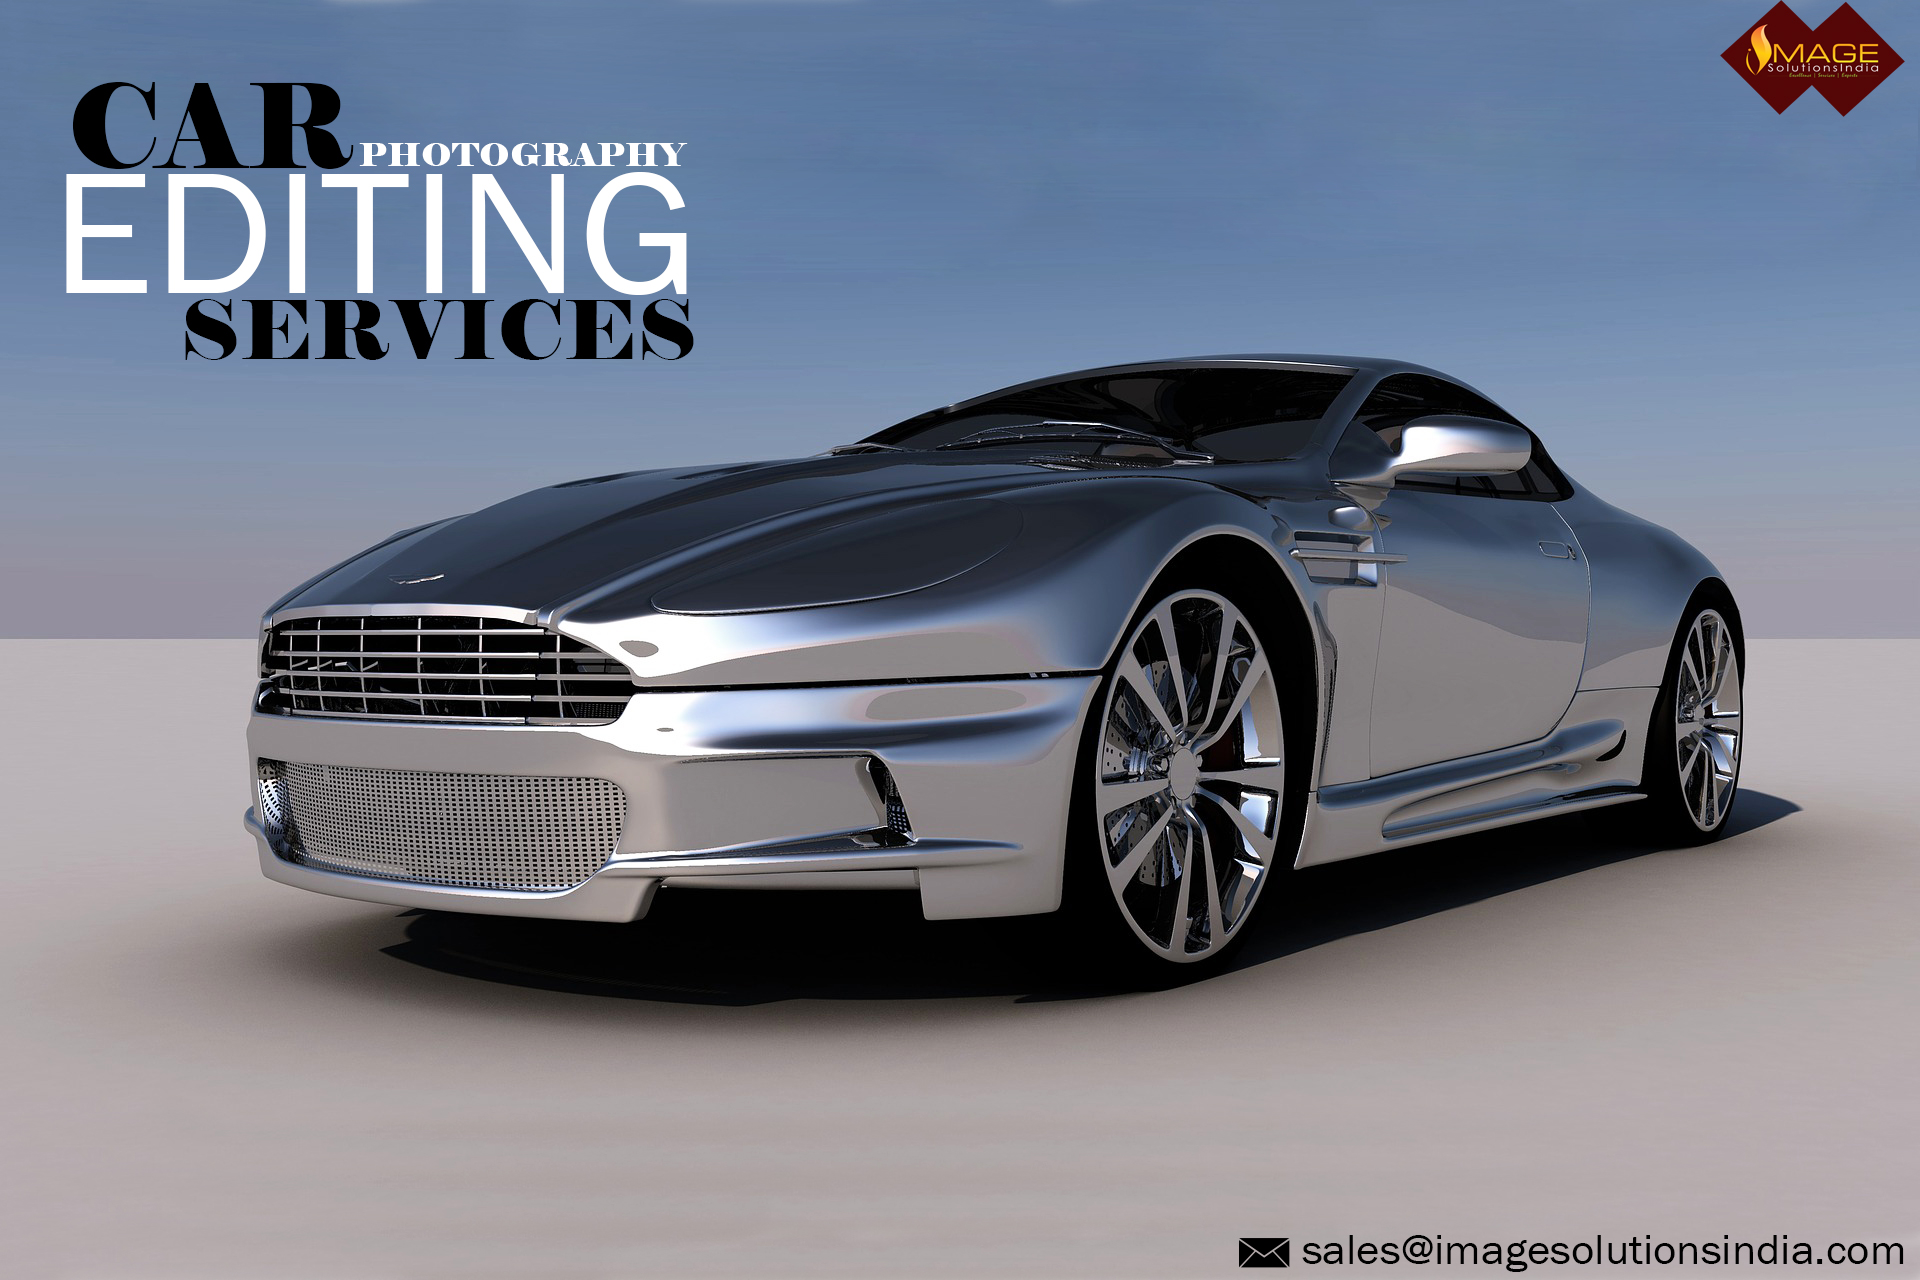 Car Photo Editing Services | Used Car/Truck Image Retouching and Enhancement Services